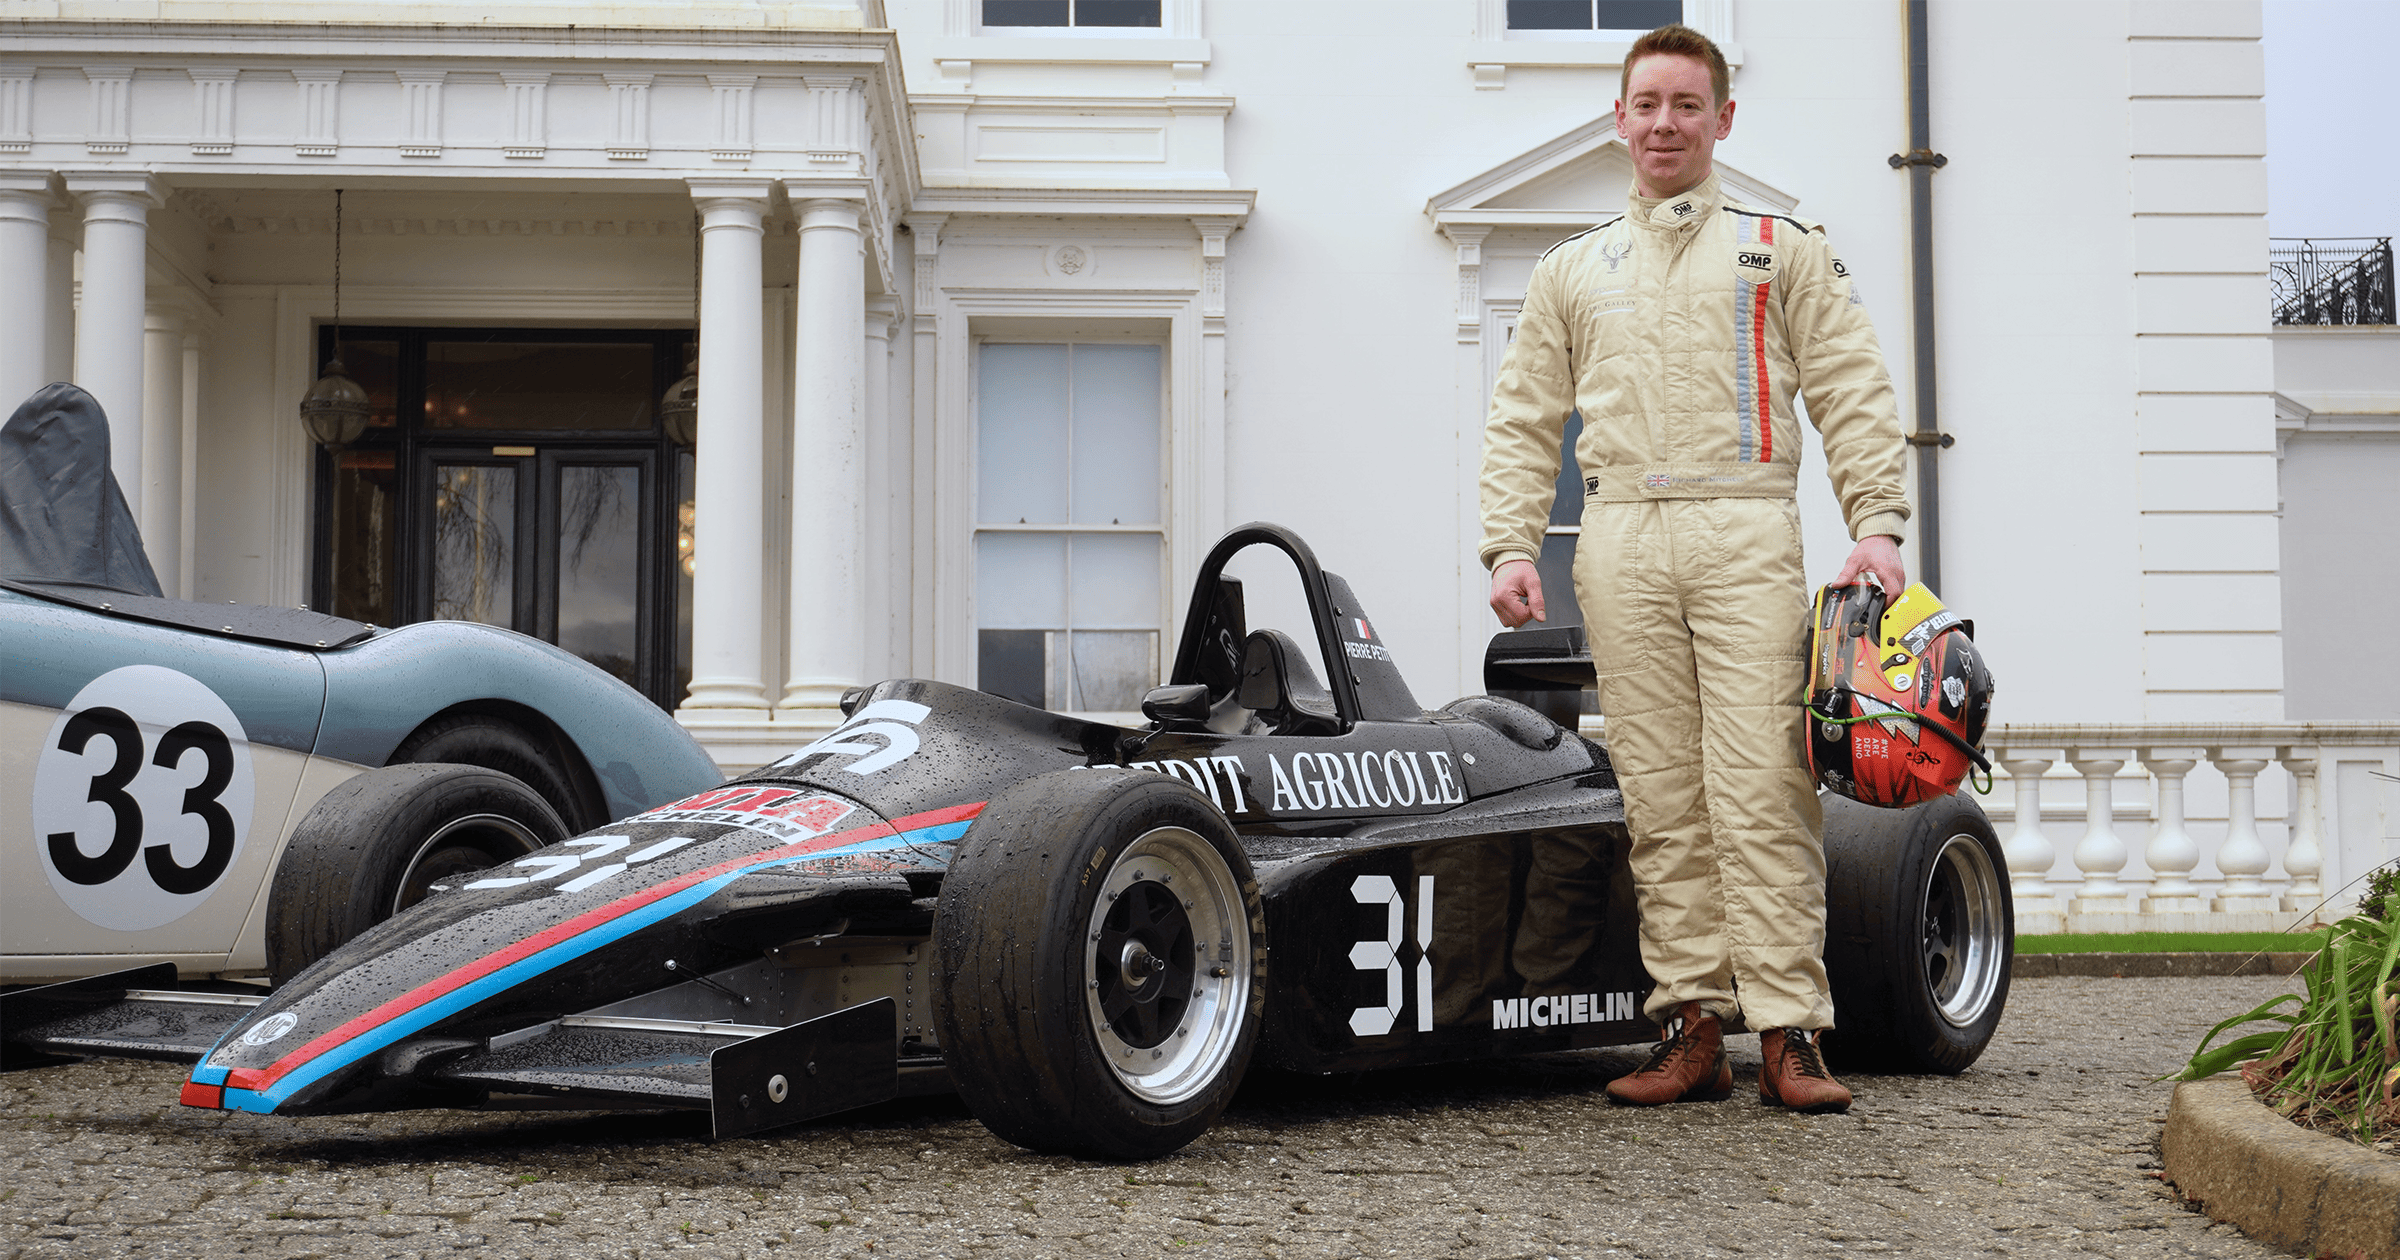 Richard Mitchell standing outside Winslade Manor with his Ensign Motorsports F3 car